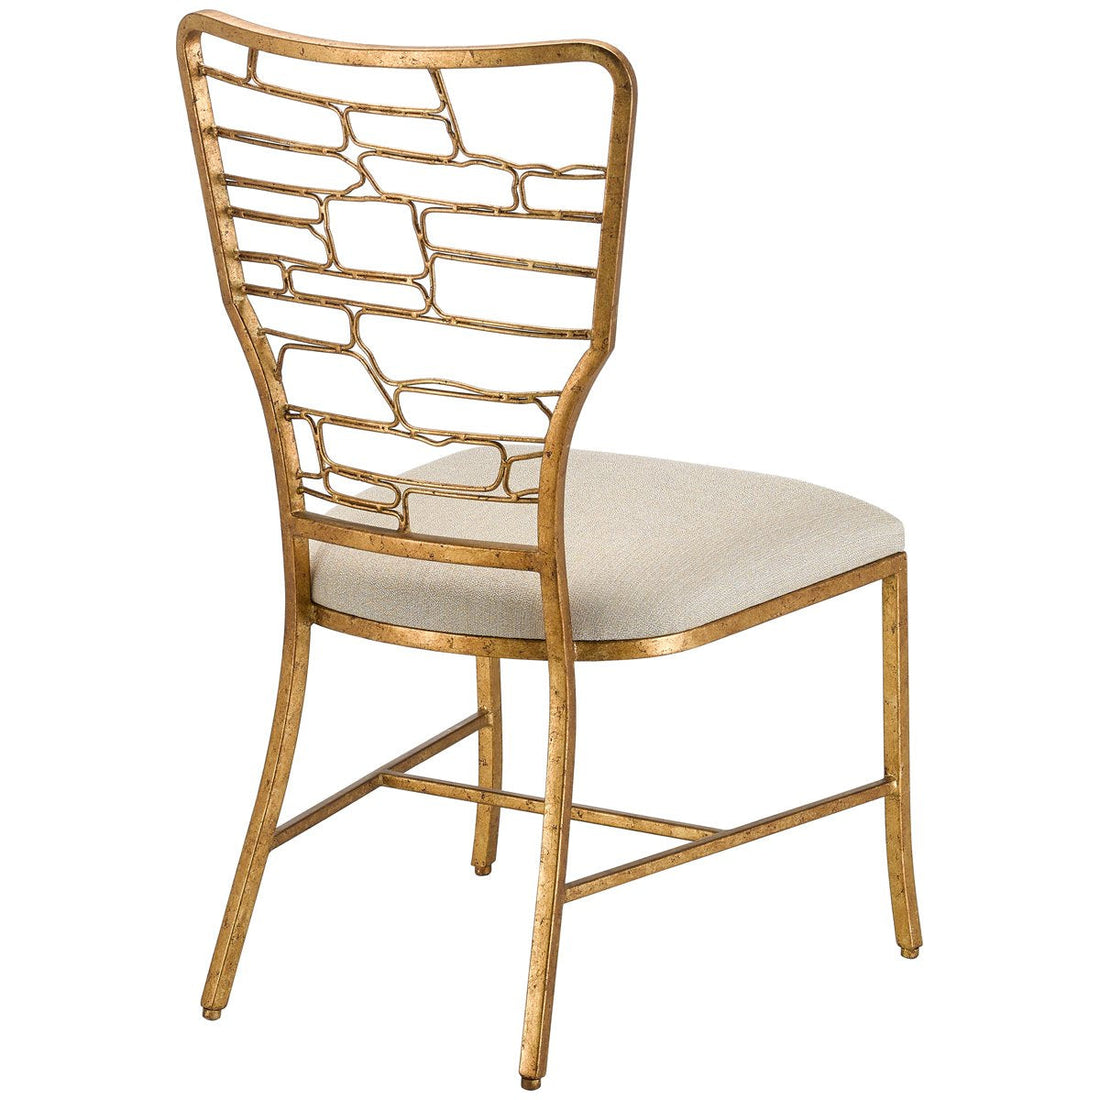 Currey and Company Vinton Chair